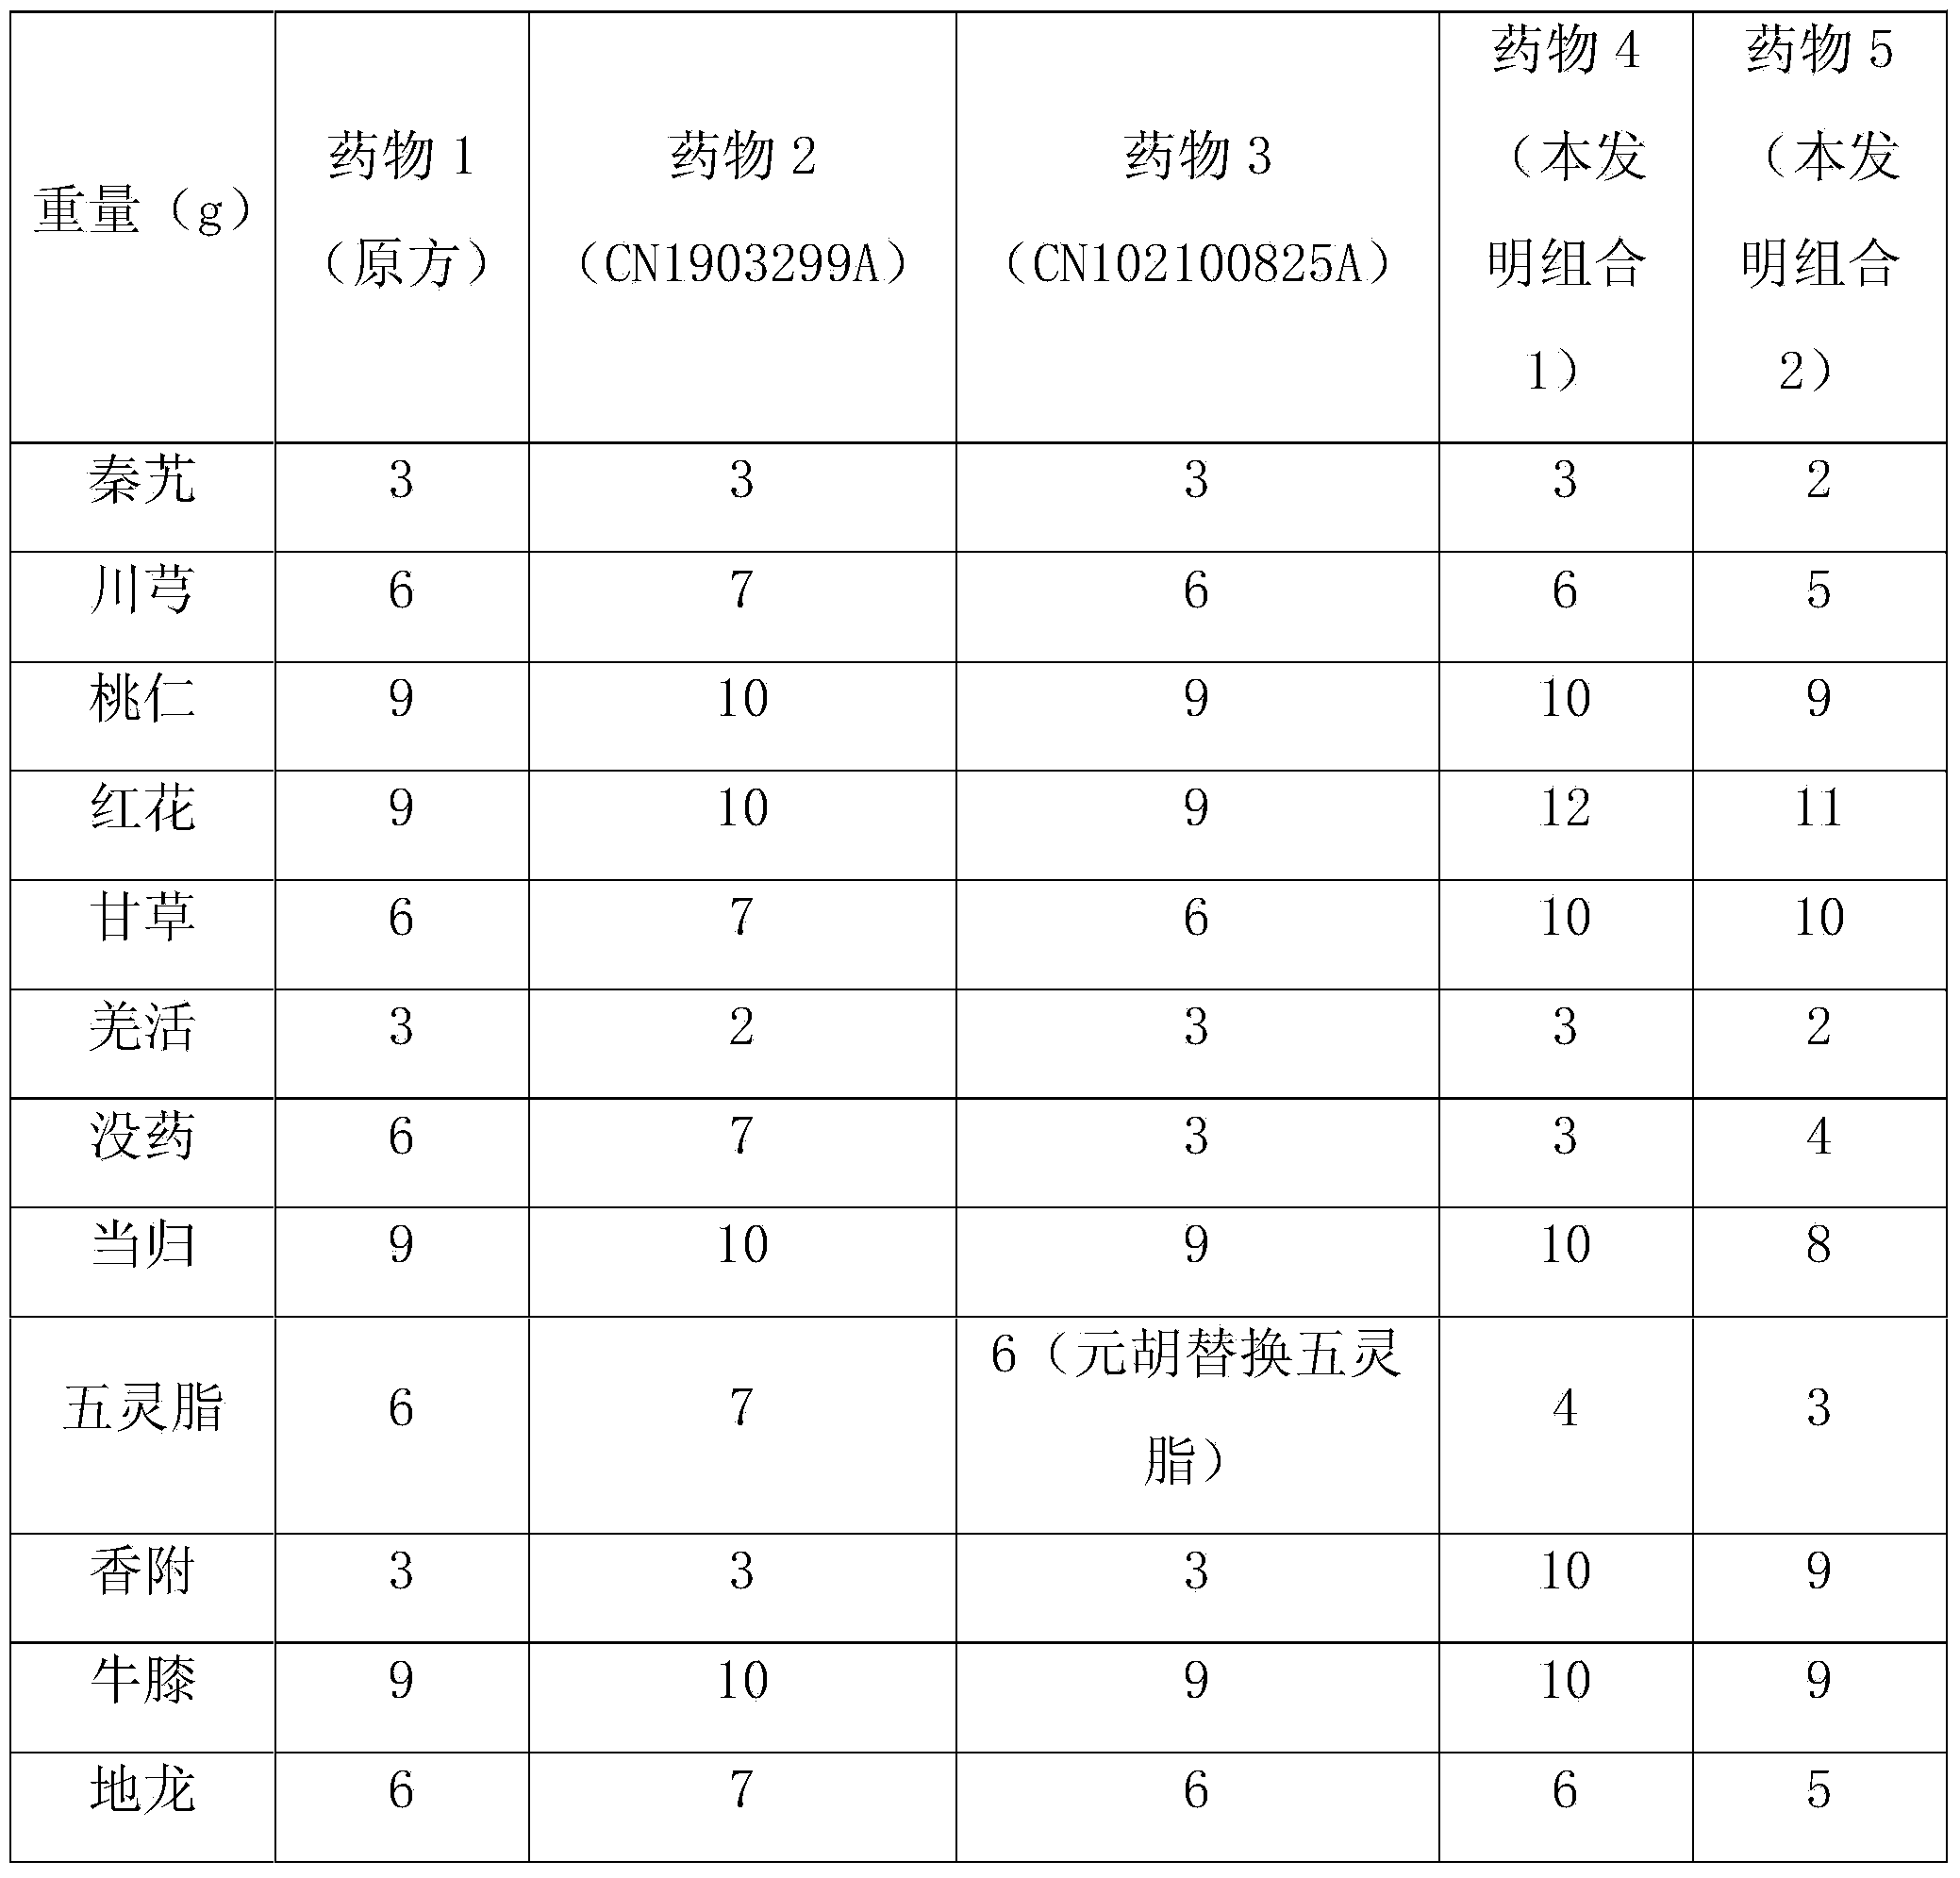 Traditional Chinese medicinal granules capable of removing blood stasis and relieving pain and preparation method thereof